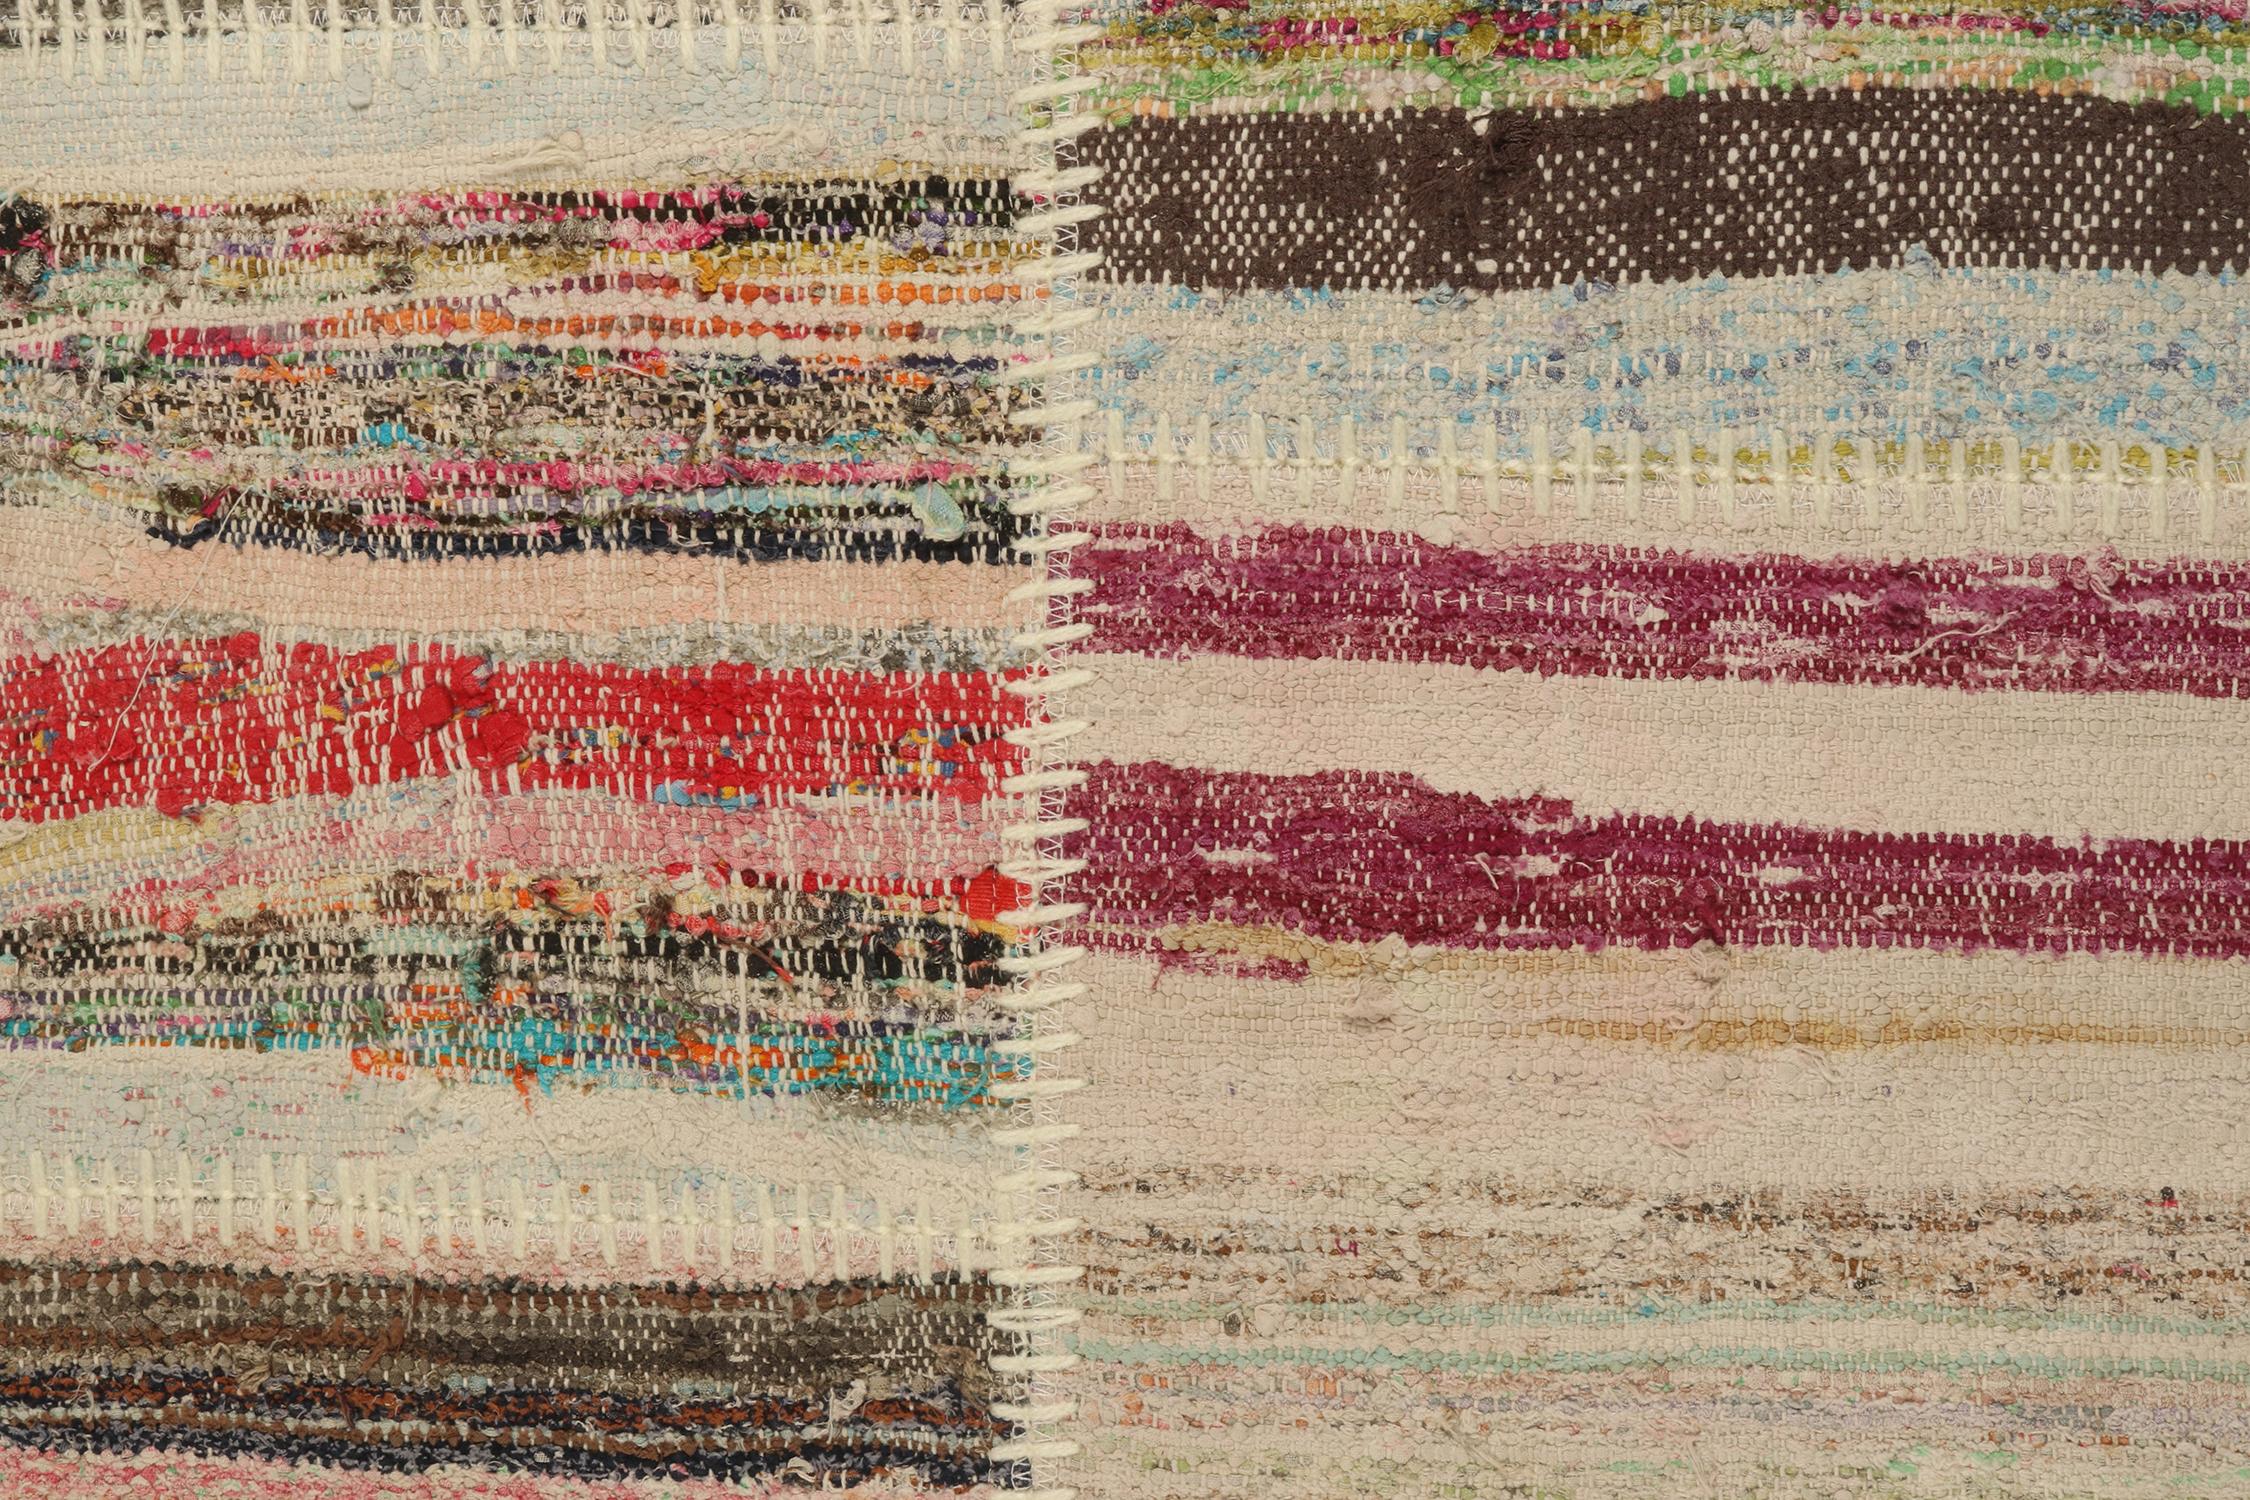 Hand-Knotted Rug & Kilim’s Patchwork Kilim Runner in Polychromatic Stripes